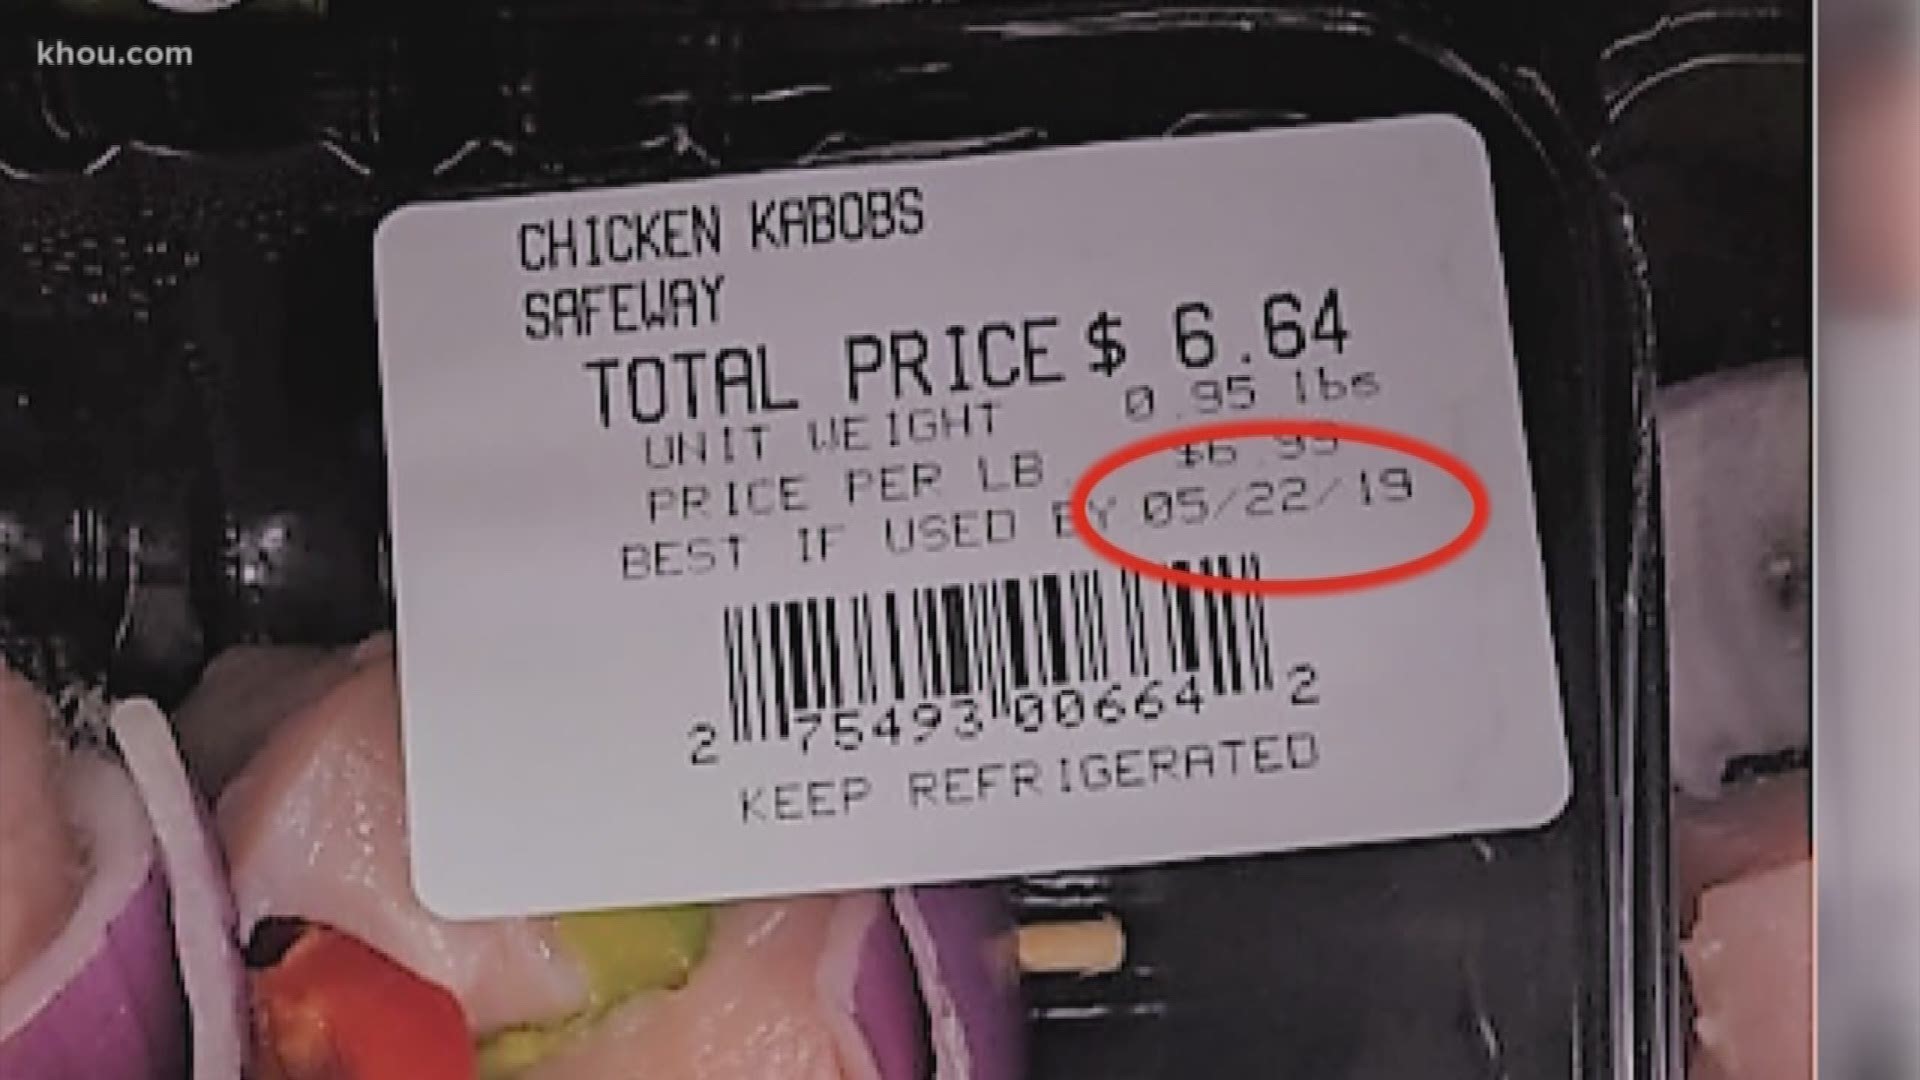 You've seen the "sell by, use by" labels on your food. But what's the difference? A social media post out in Washington, D.C. claimed a grocery store there sold expired meat. Let's Verify.